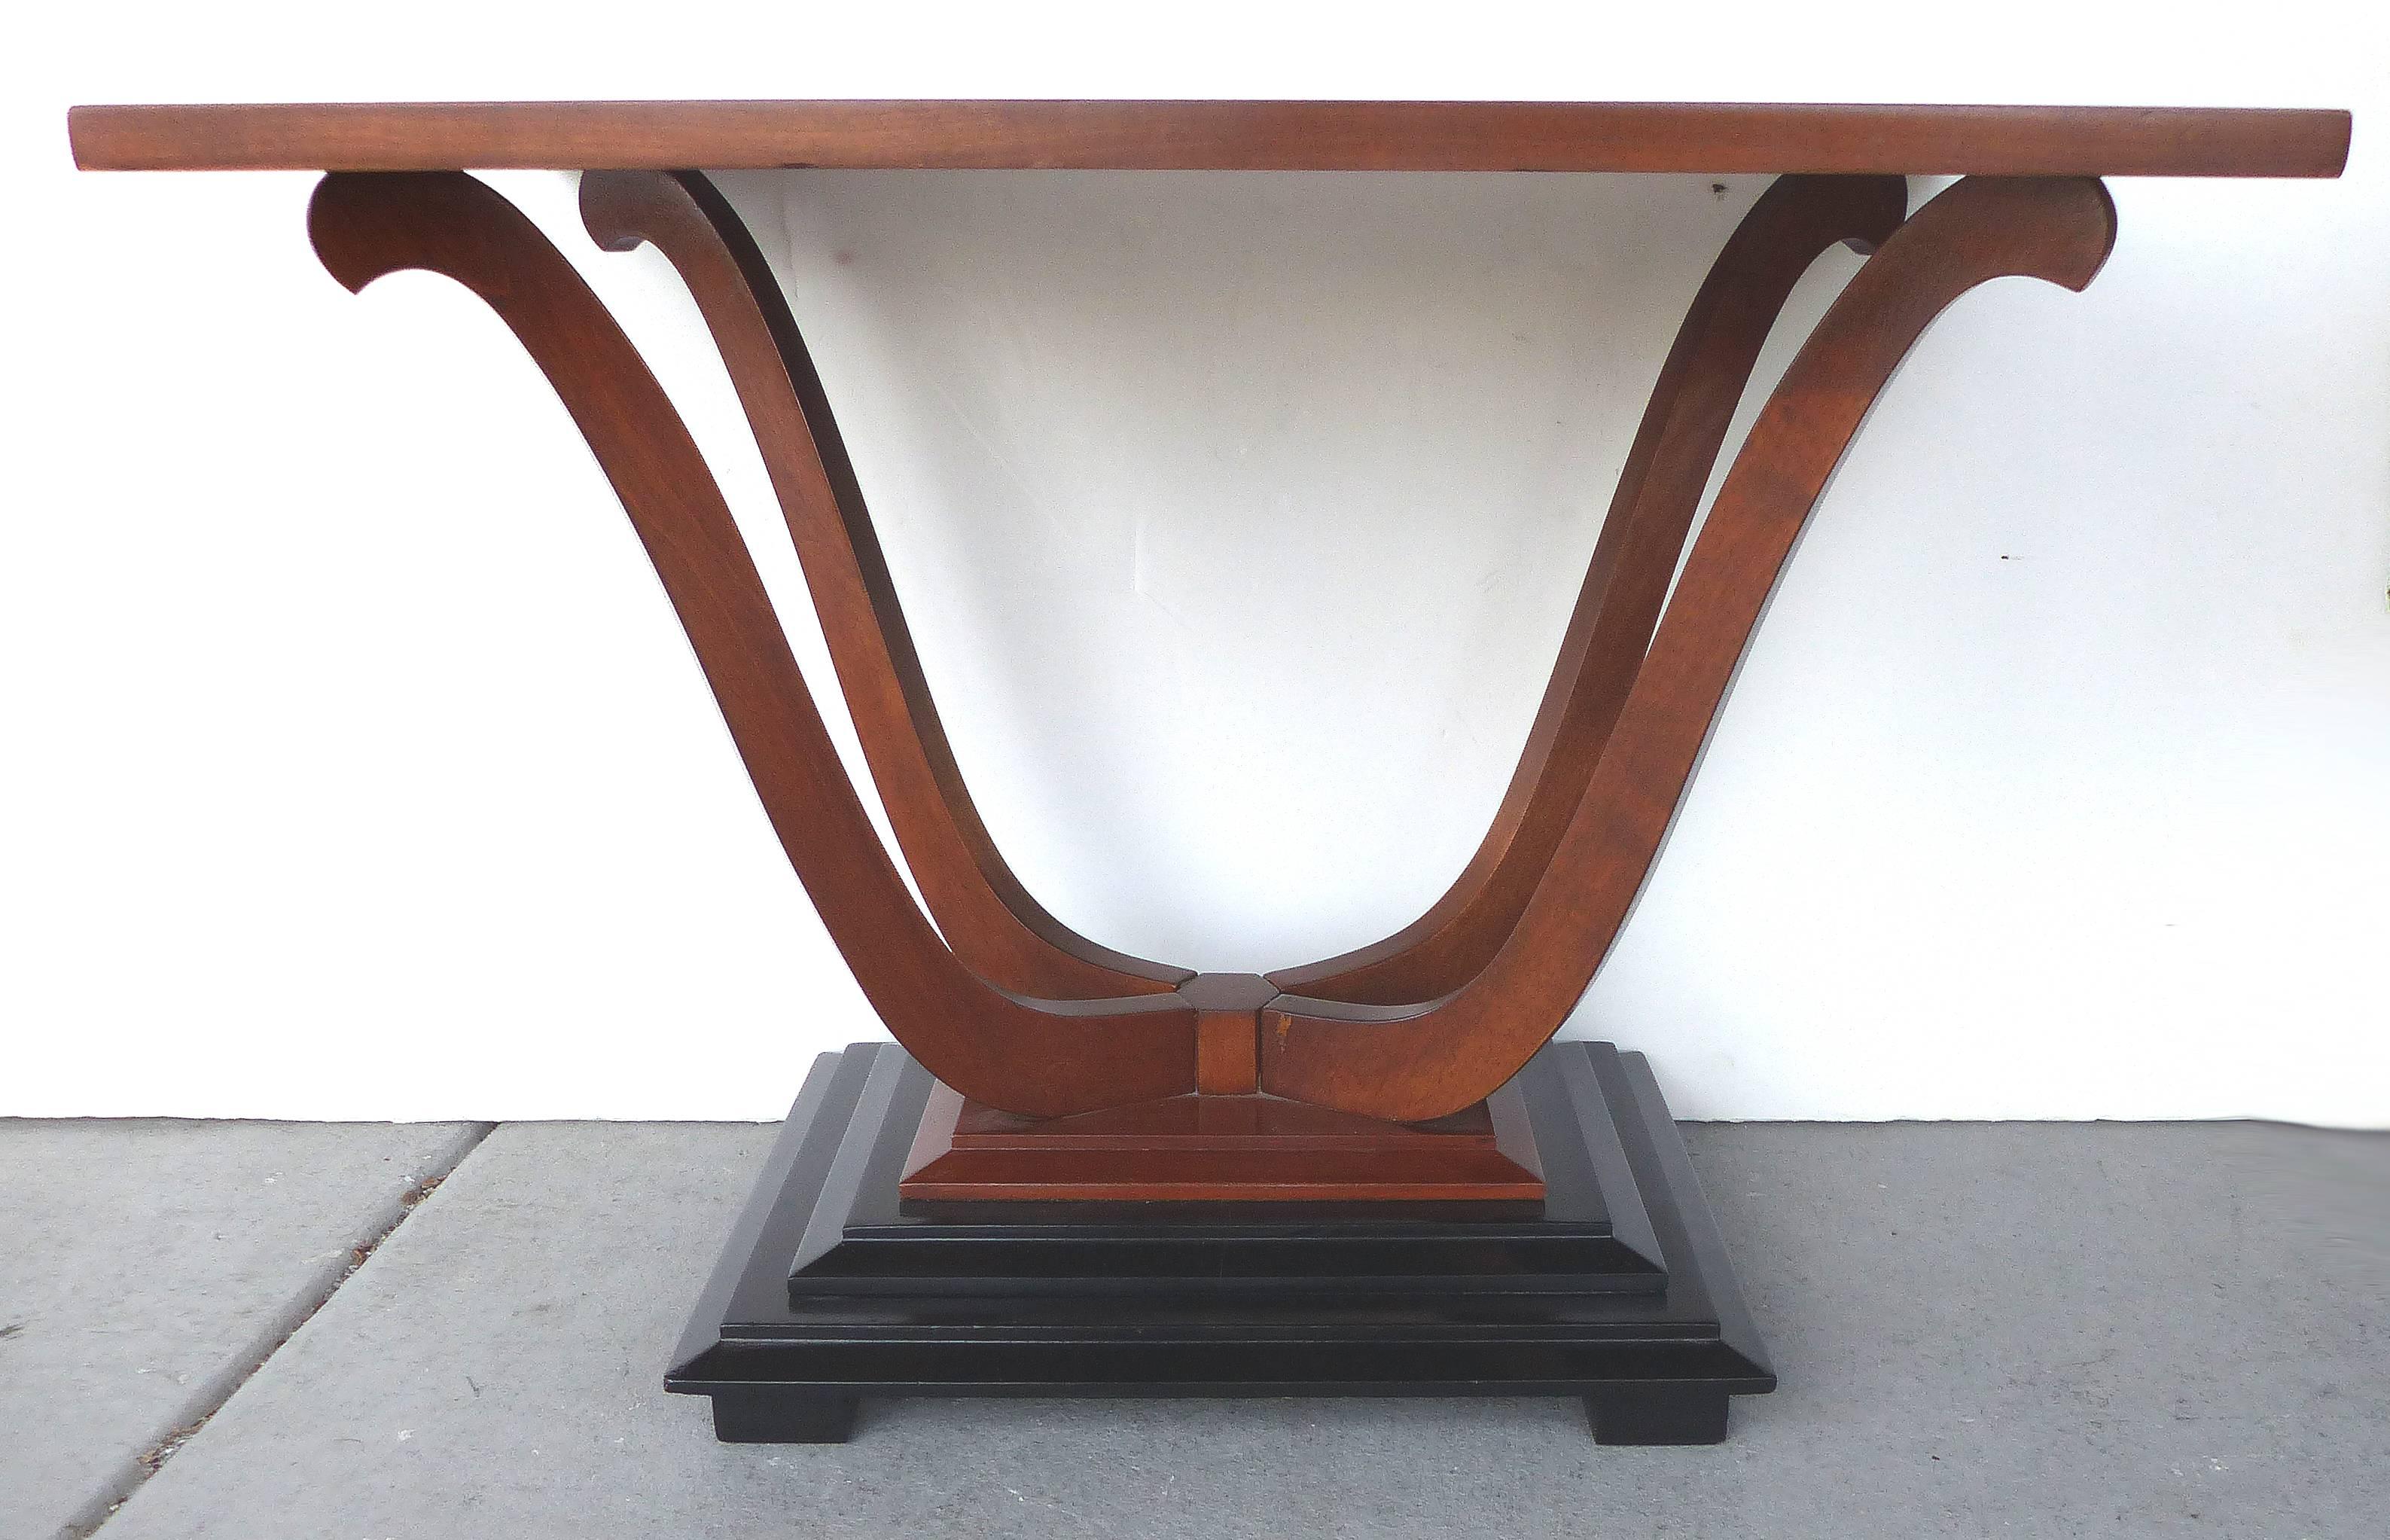 Art Deco David Robrtson Smith Dynamique Johnson Furniture Coffee Table

This iconic and rare American Art Deco table was designed circa 1928 by David Robertson Smith for the Dynamique Creations division of Johnson-Handley-Johnson Co. of Grand